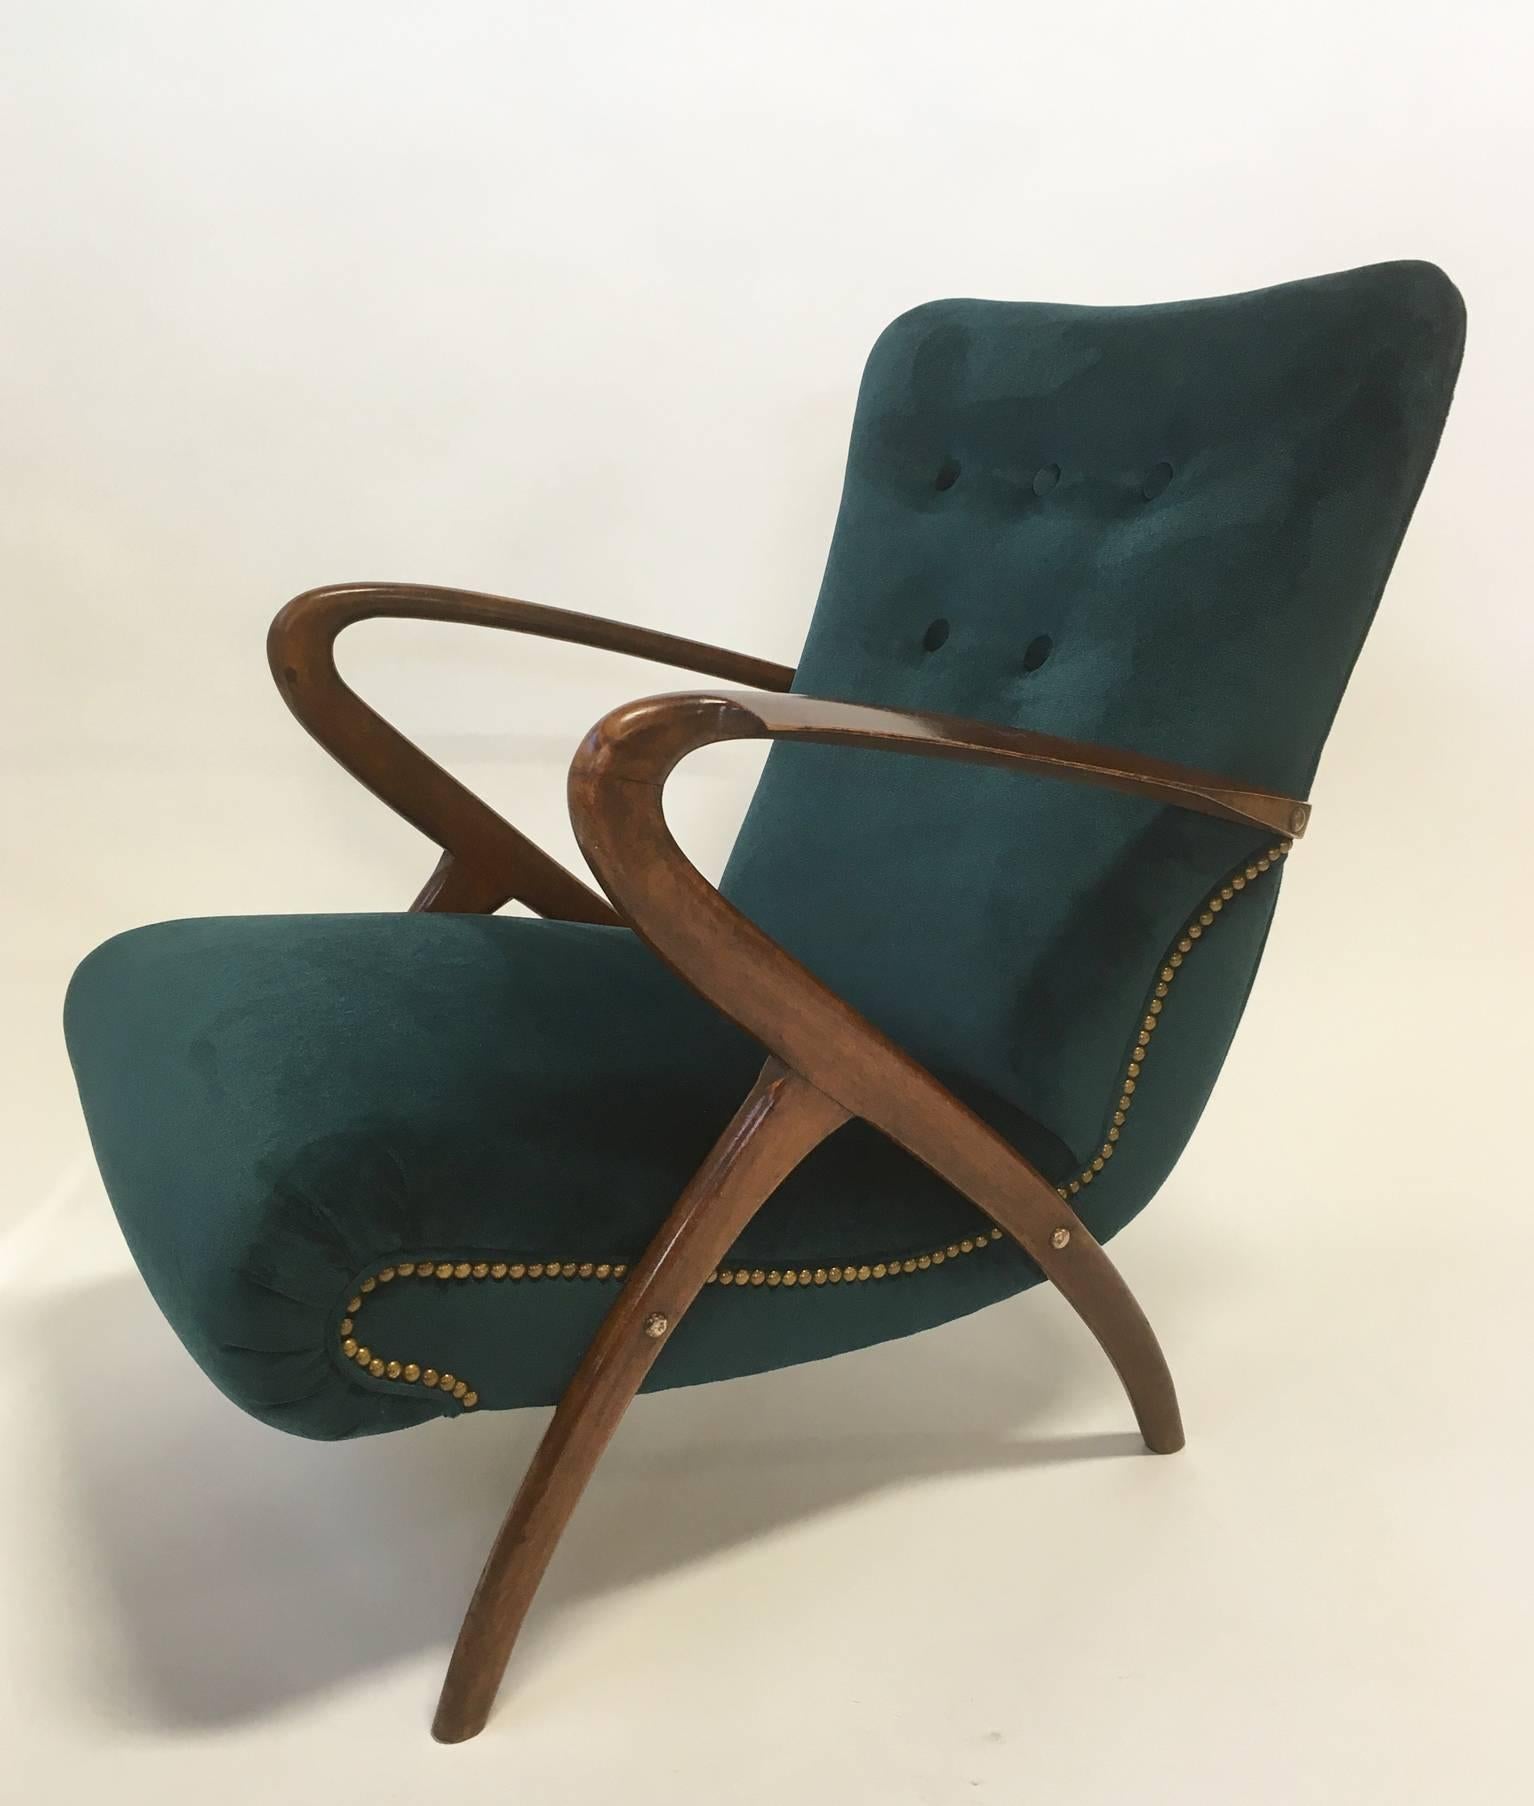 Sculptural open-arm lounge chair in the style of Paolo Buffa, Italy, circa 1950, of polished walnut frame, with custom velvet upholstery in a deep turquoise color. Brass nail trim accents the lines along the sides, and curves along back.